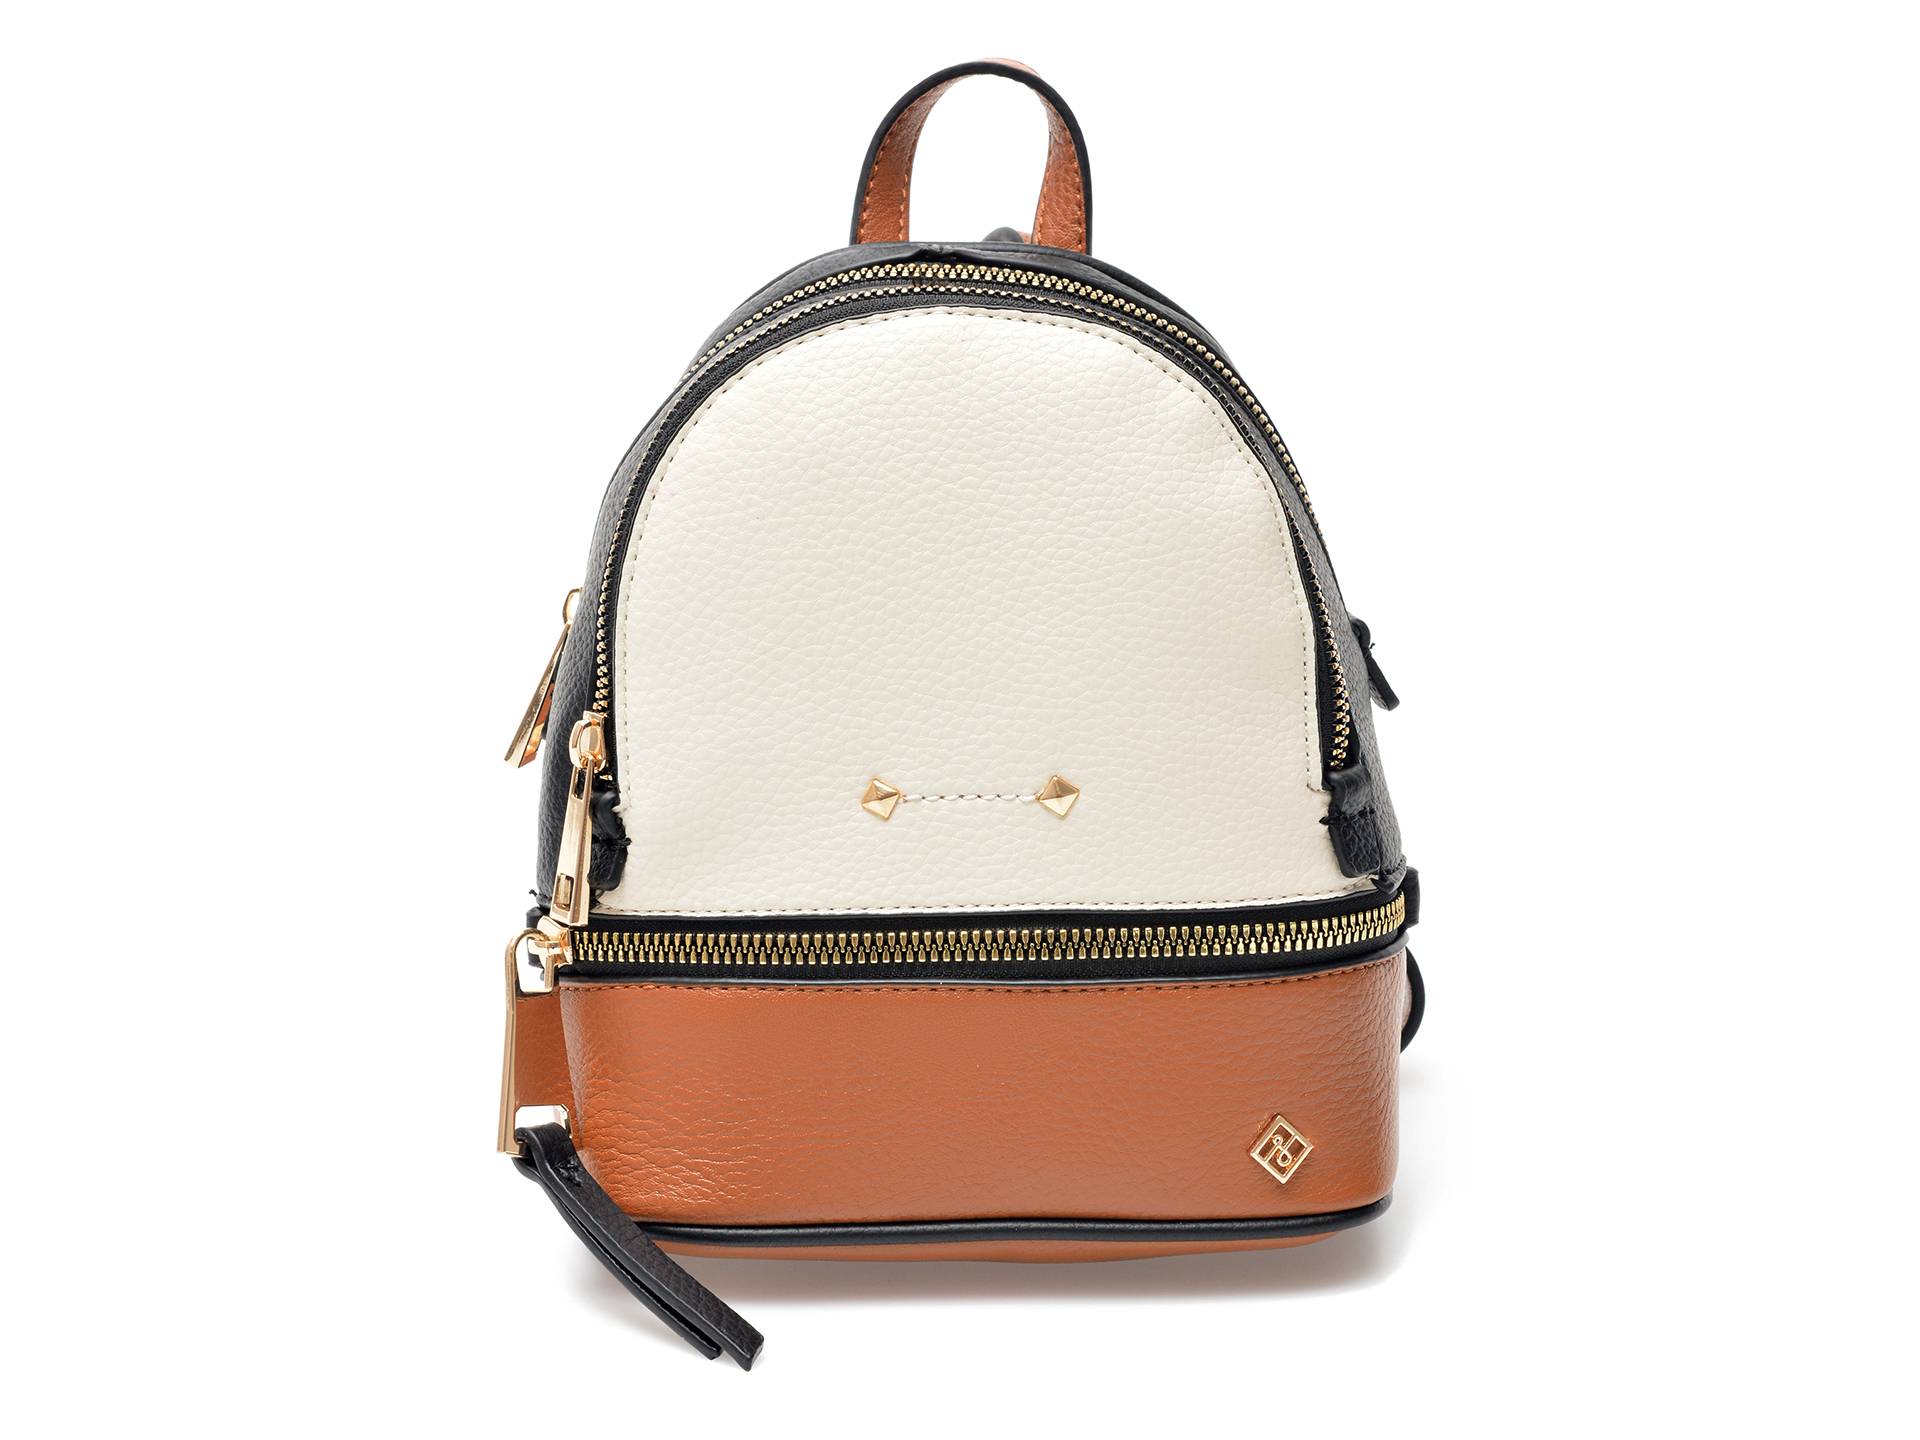 Rucsac CALL IT SPRING maro, TINY220, din piele ecologica